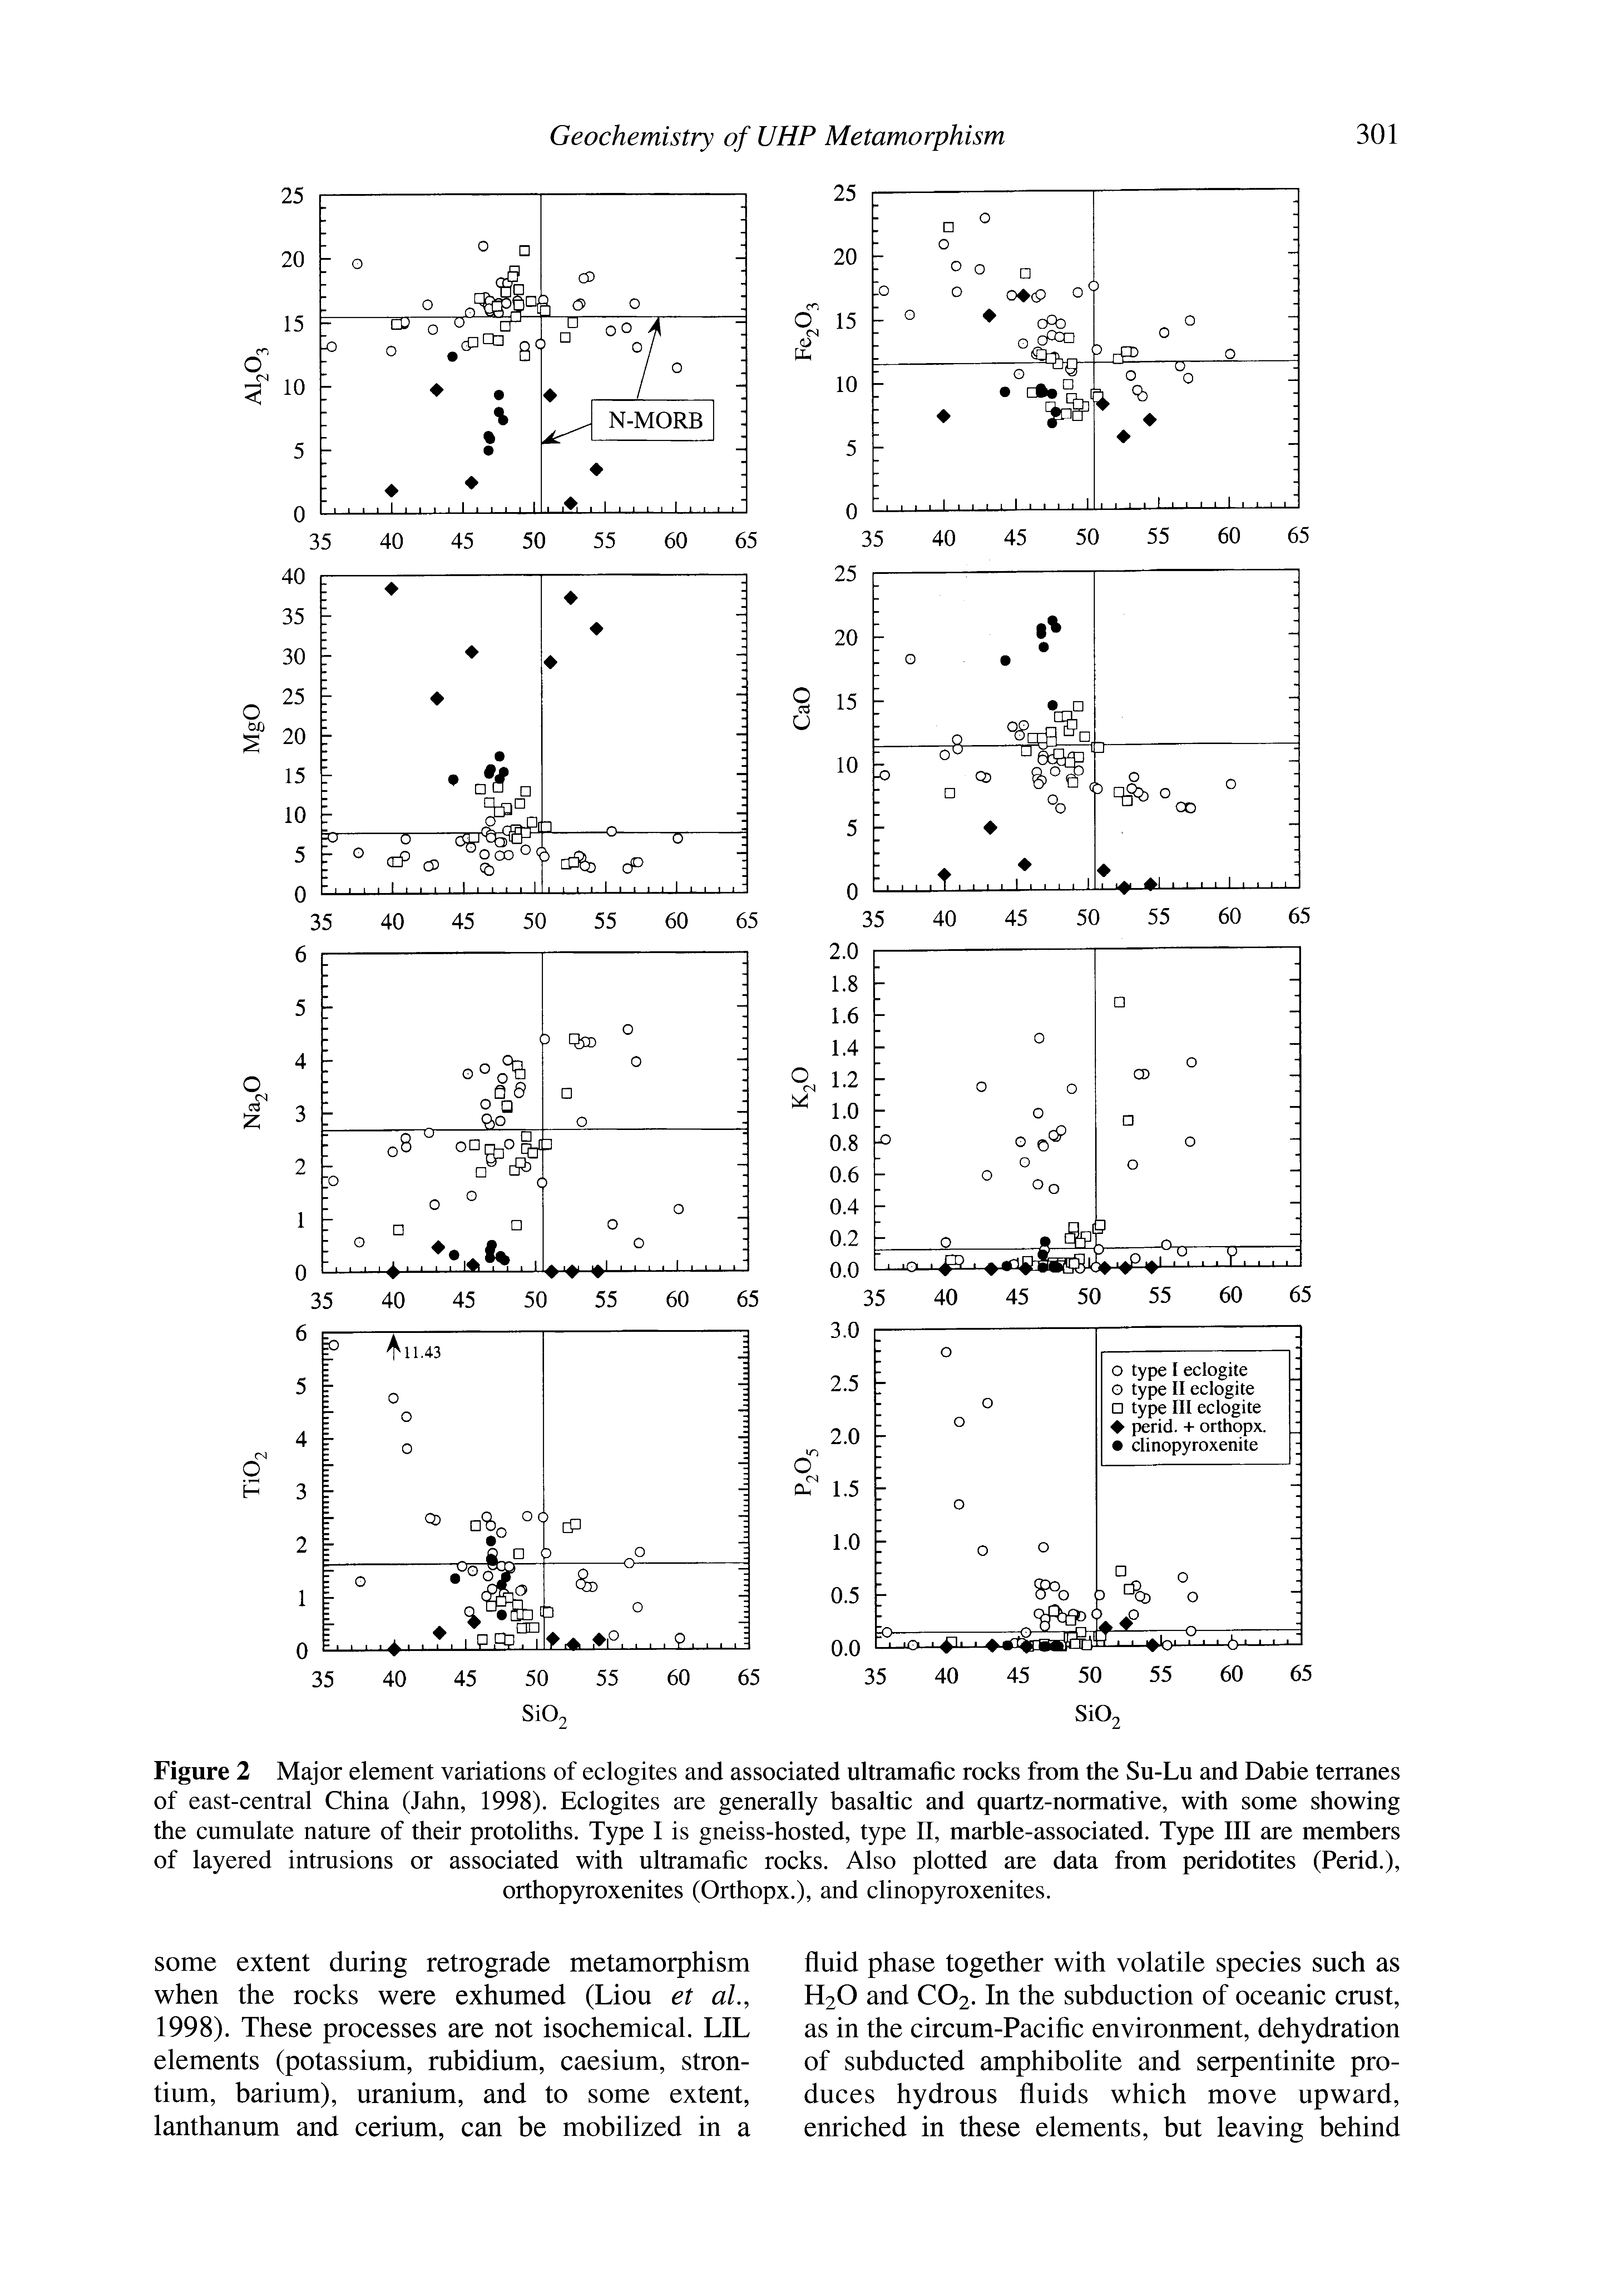 Figure 2 Major element variations of eclogites and associated ultramafic rocks from the Su-Lu and Dabie terranes of east-central China (Jahn, 1998). Eclogites are generally basaltic and quartz-normative, with some showing the cumulate nature of their protoliths. Type 1 is gneiss-hosted, type II, marble-associated. Type III are members of layered intrusions or associated with ultramafic rocks. Also plotted are data from peridotites (Perid.),...